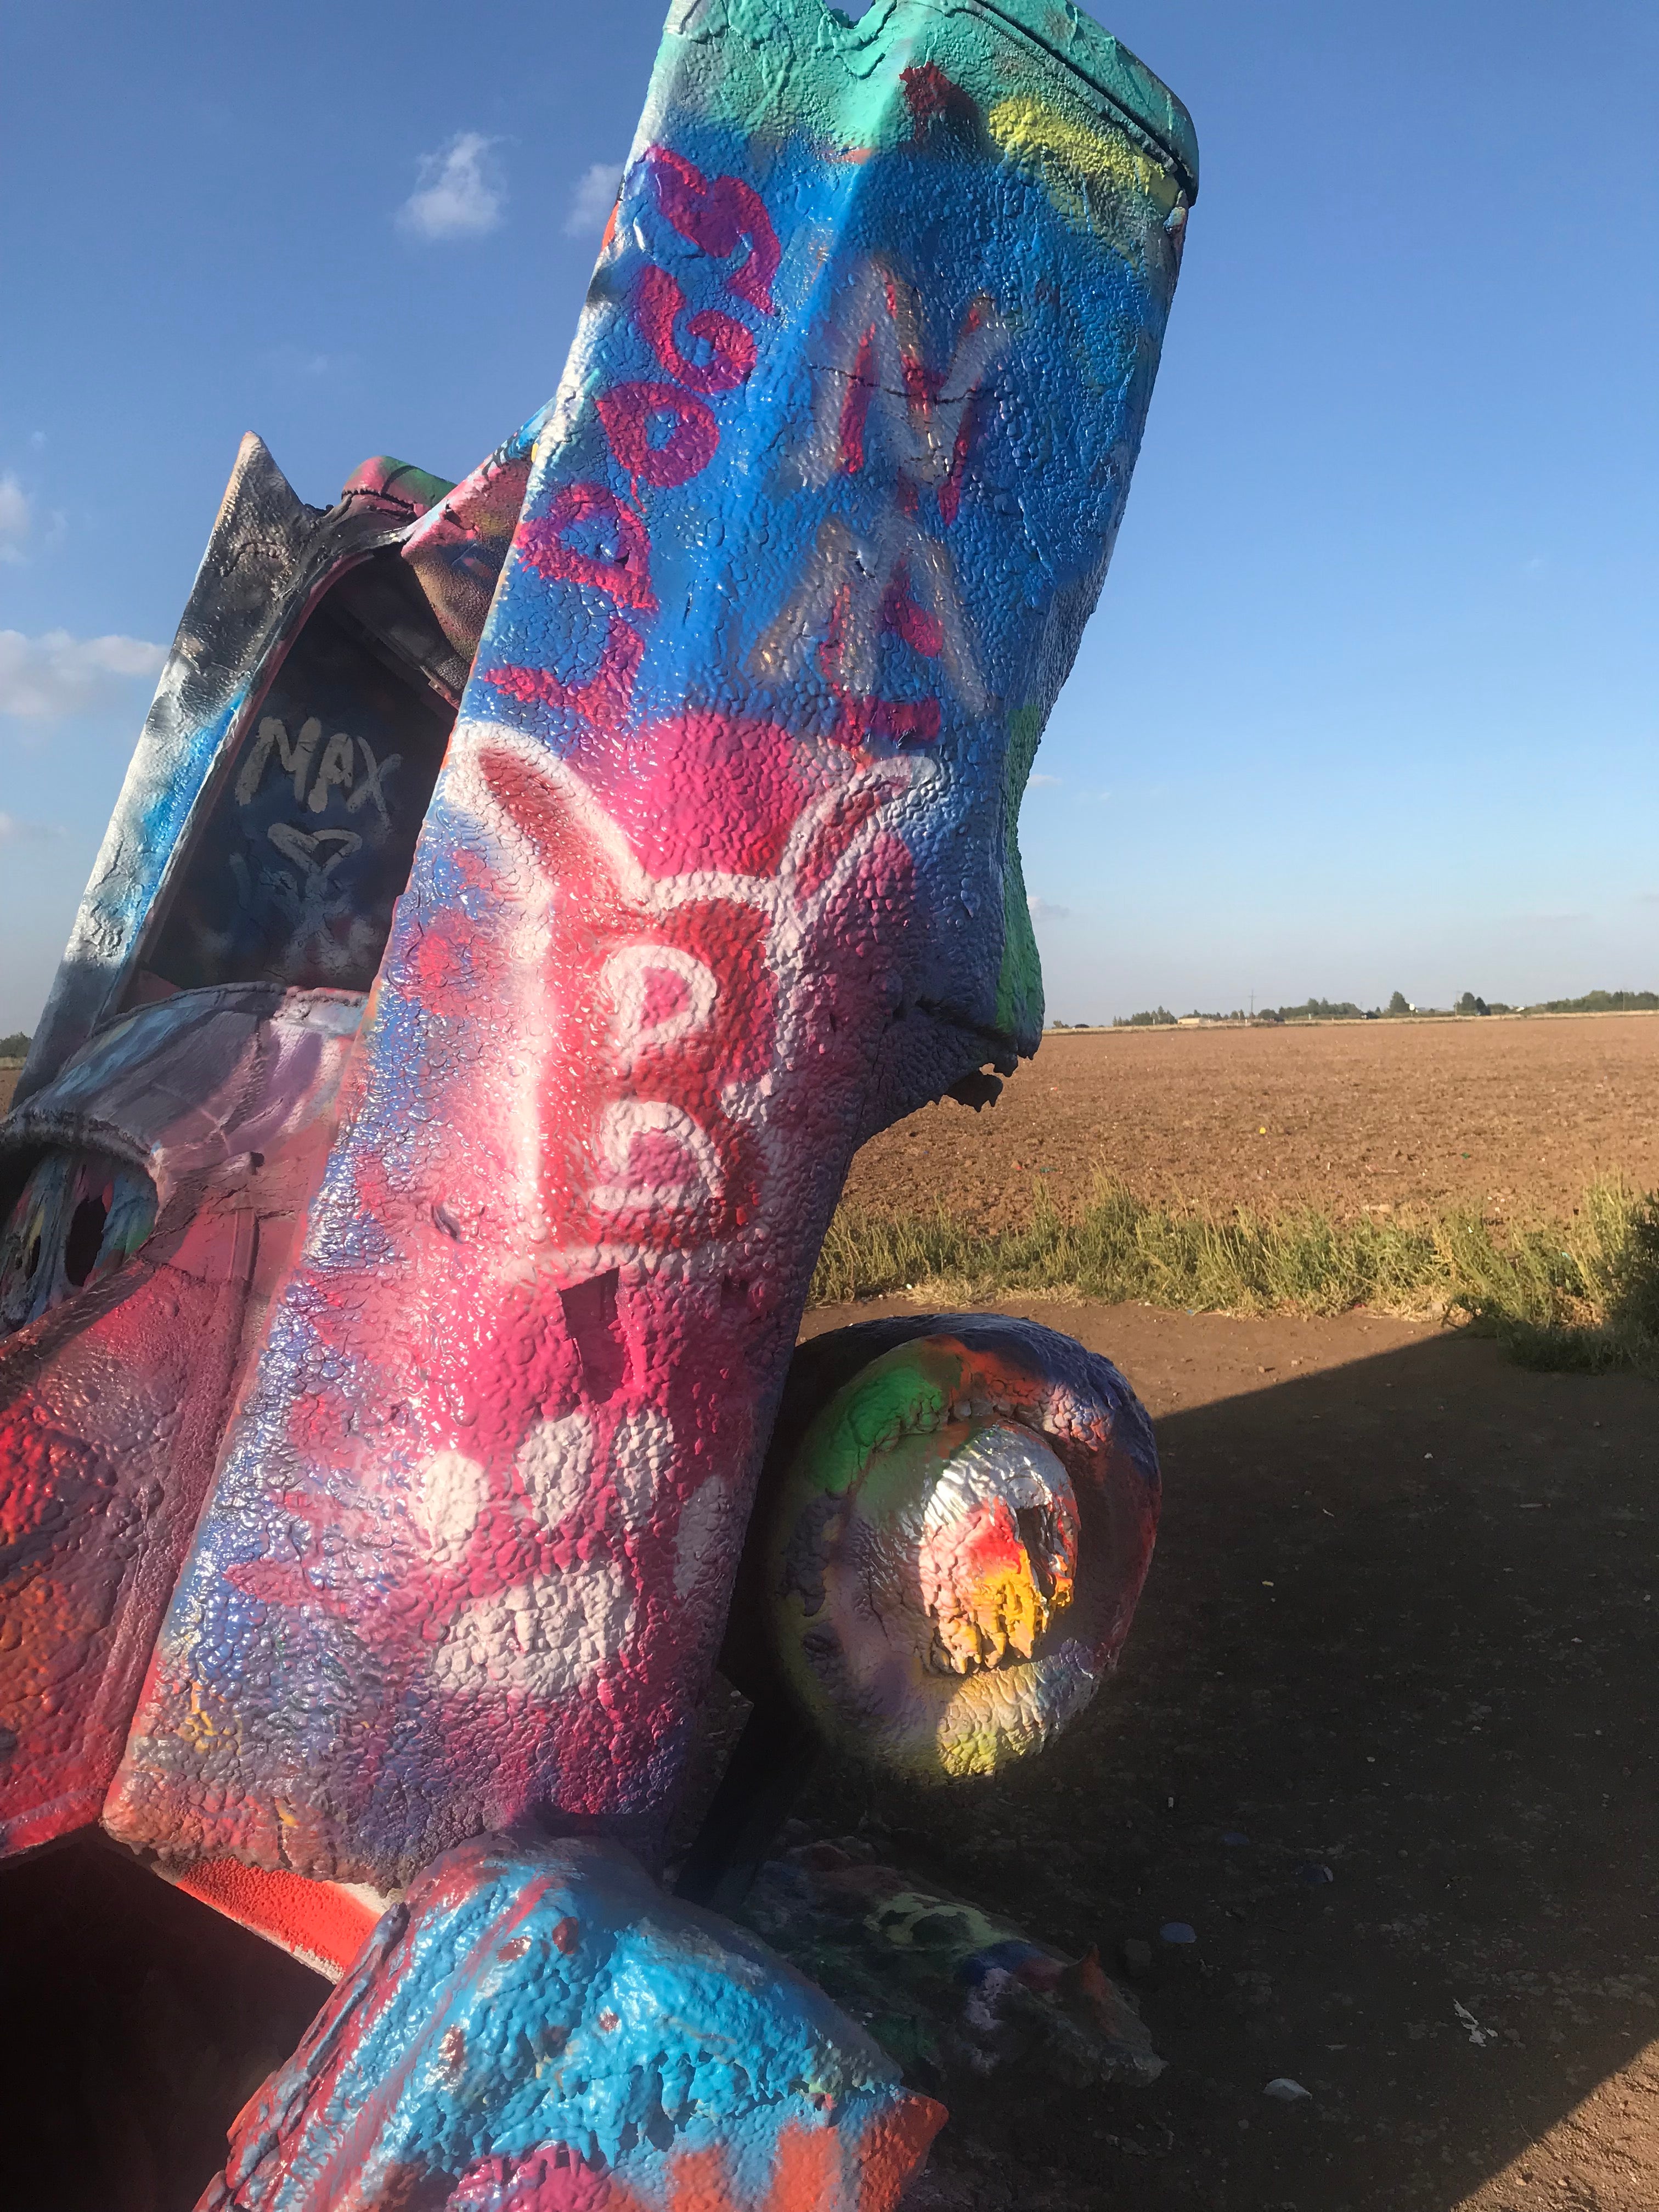 You can walk to Cadillac Ranch but it will be a bit of a walk down the service road especially if it is windy, but if. you do come make sure you bring your cans of paint and add to the art